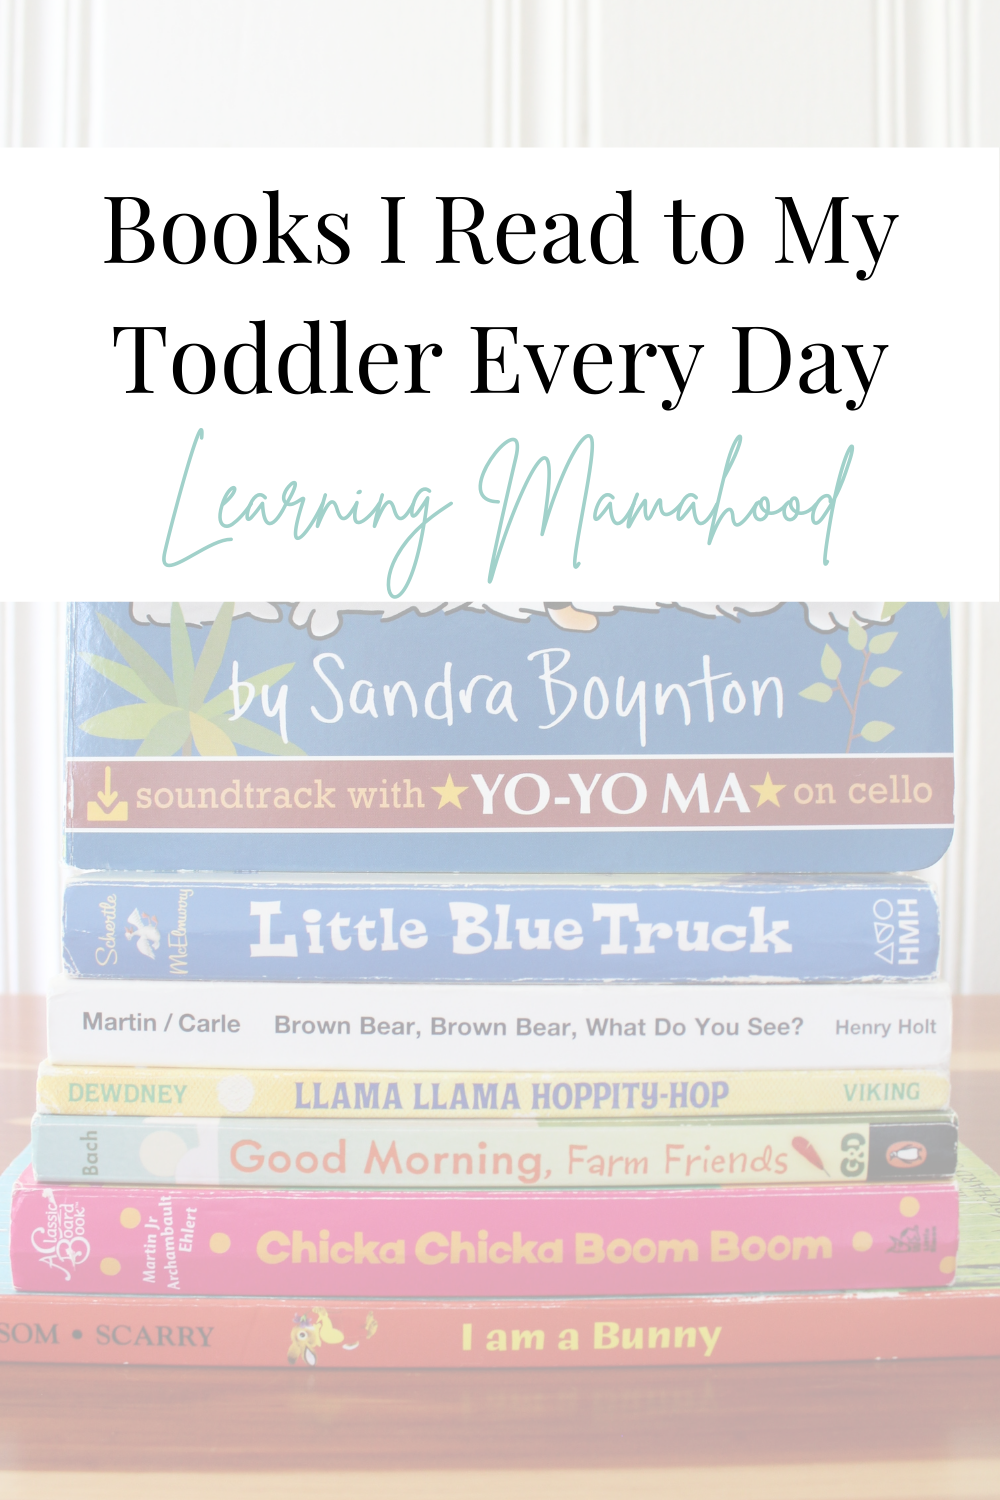 Books I Read to My Toddler Every Day